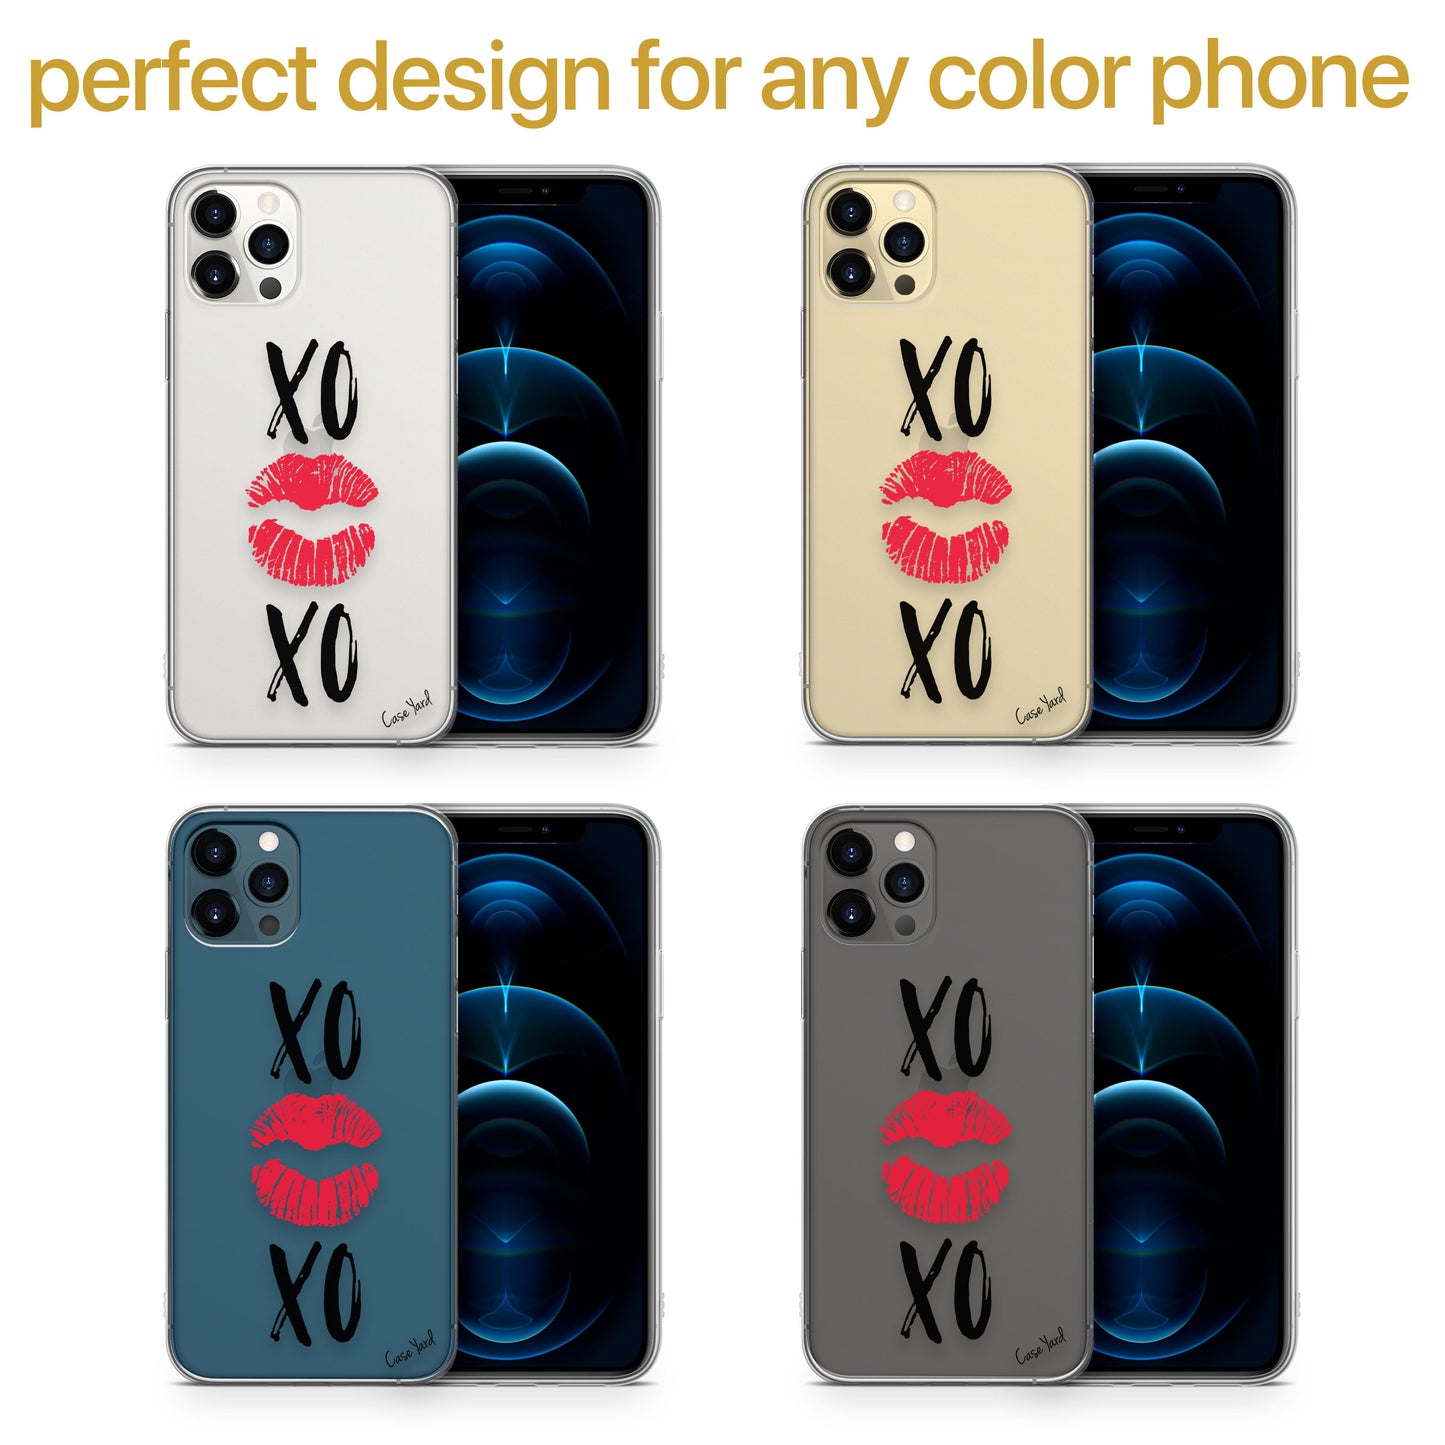 TPU Clear case with (XOXO Kiss) Design for iPhone & Samsung Phones